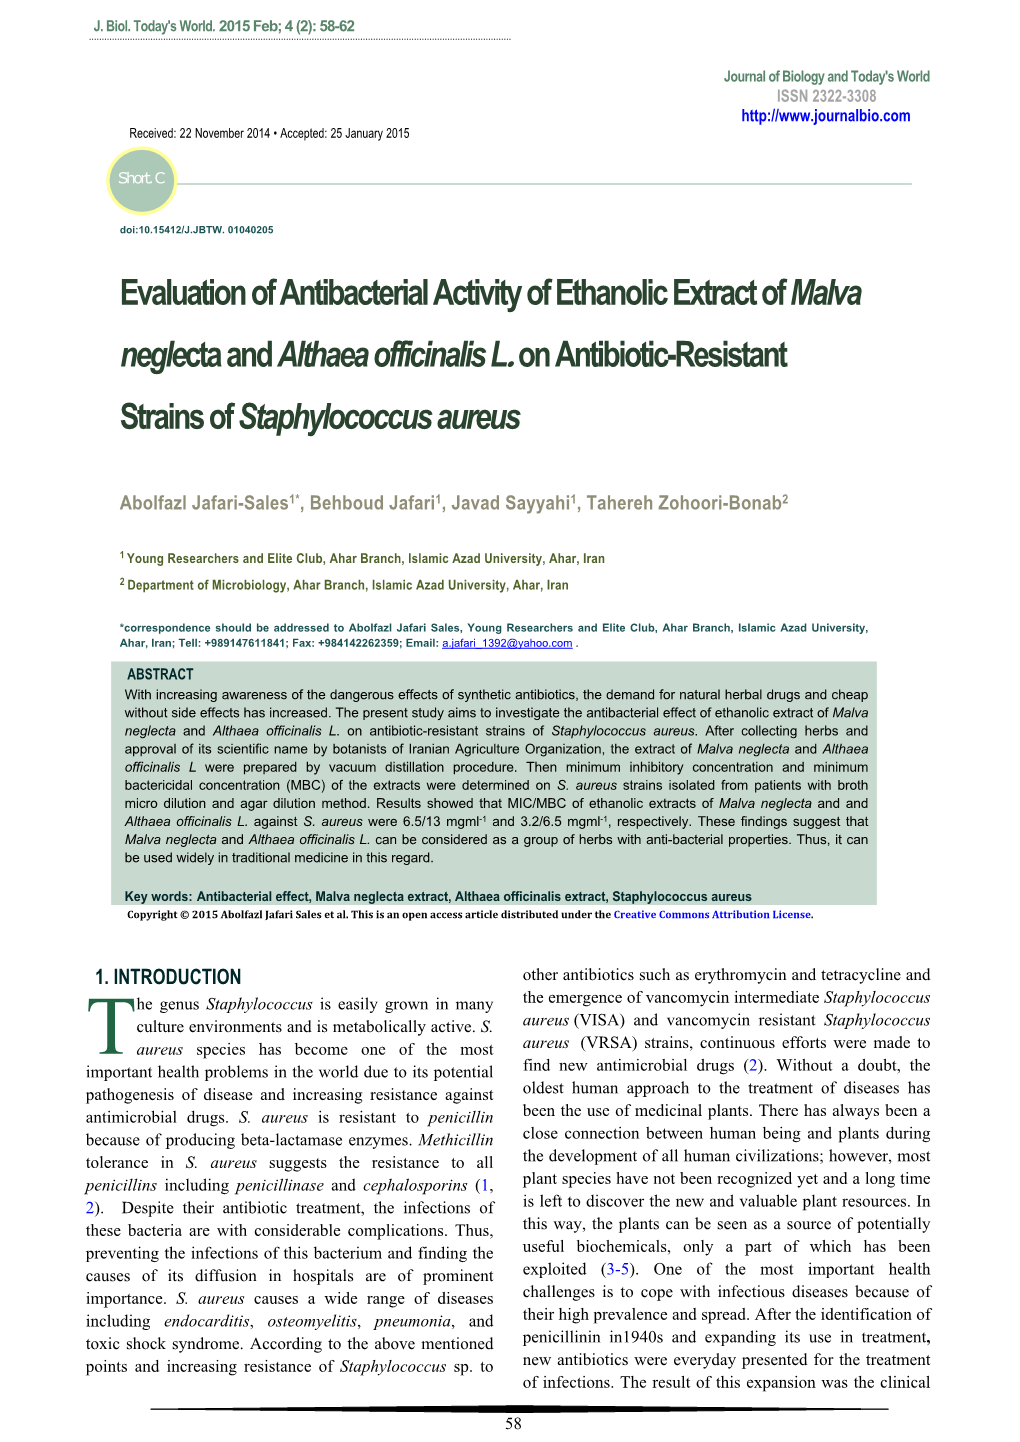 Evaluation of Antibacterial Activity of Ethanolic Extract of Malva Neglecta and Althaea Officinalis L. on Antibiotic-Resistant Strains of Staphylococcus Aureus